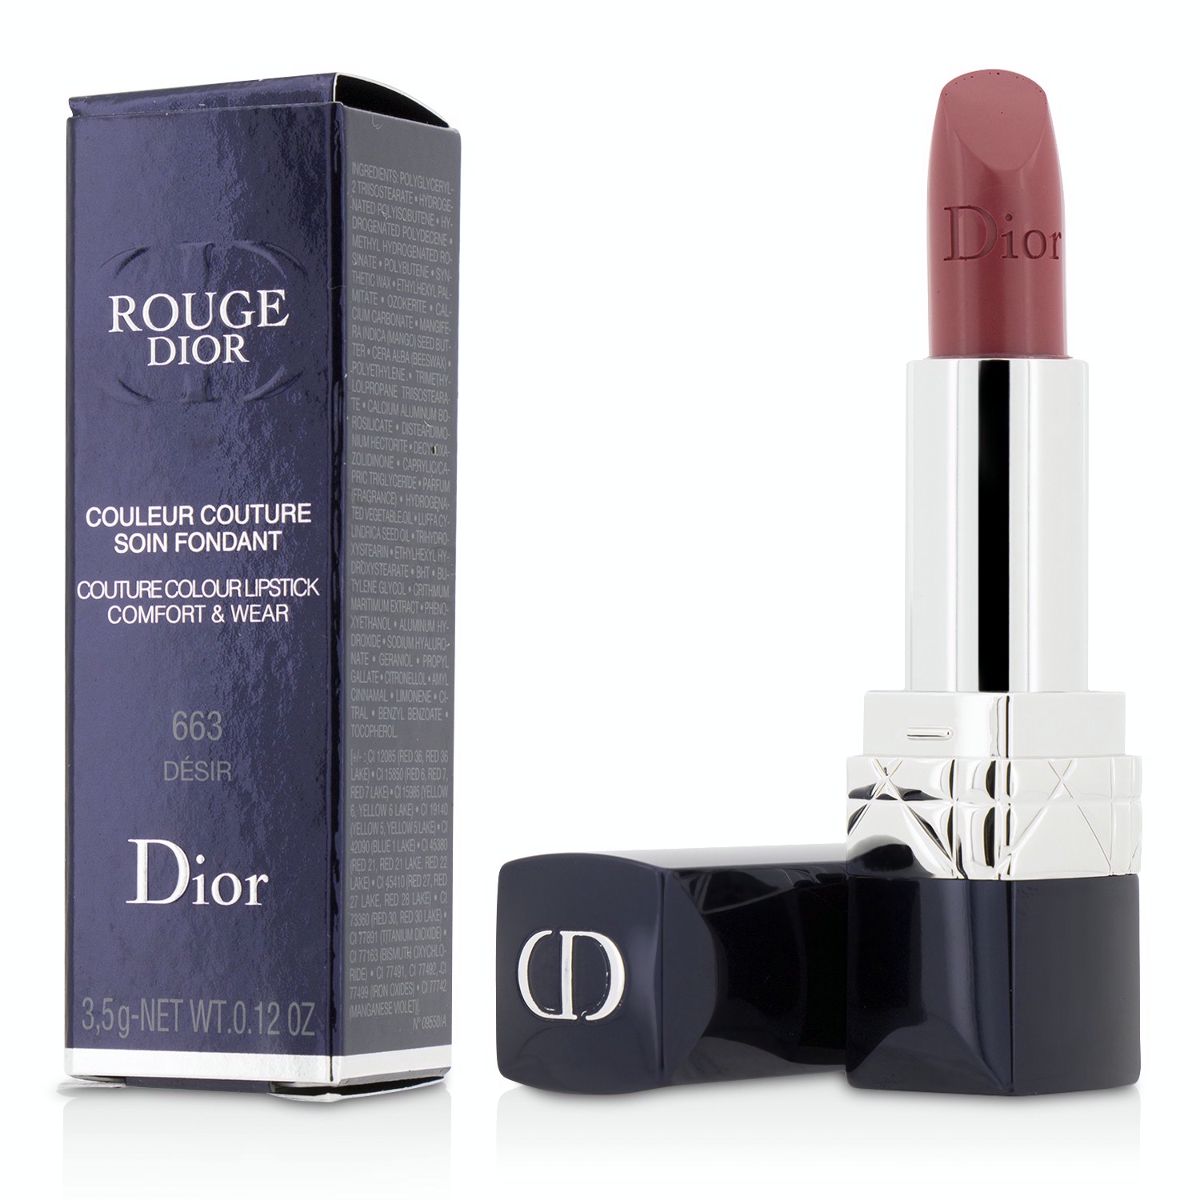 Rouge Dior Couture Colour Comfort  Wear Lipstick - # 663 Desir Christian Dior Image